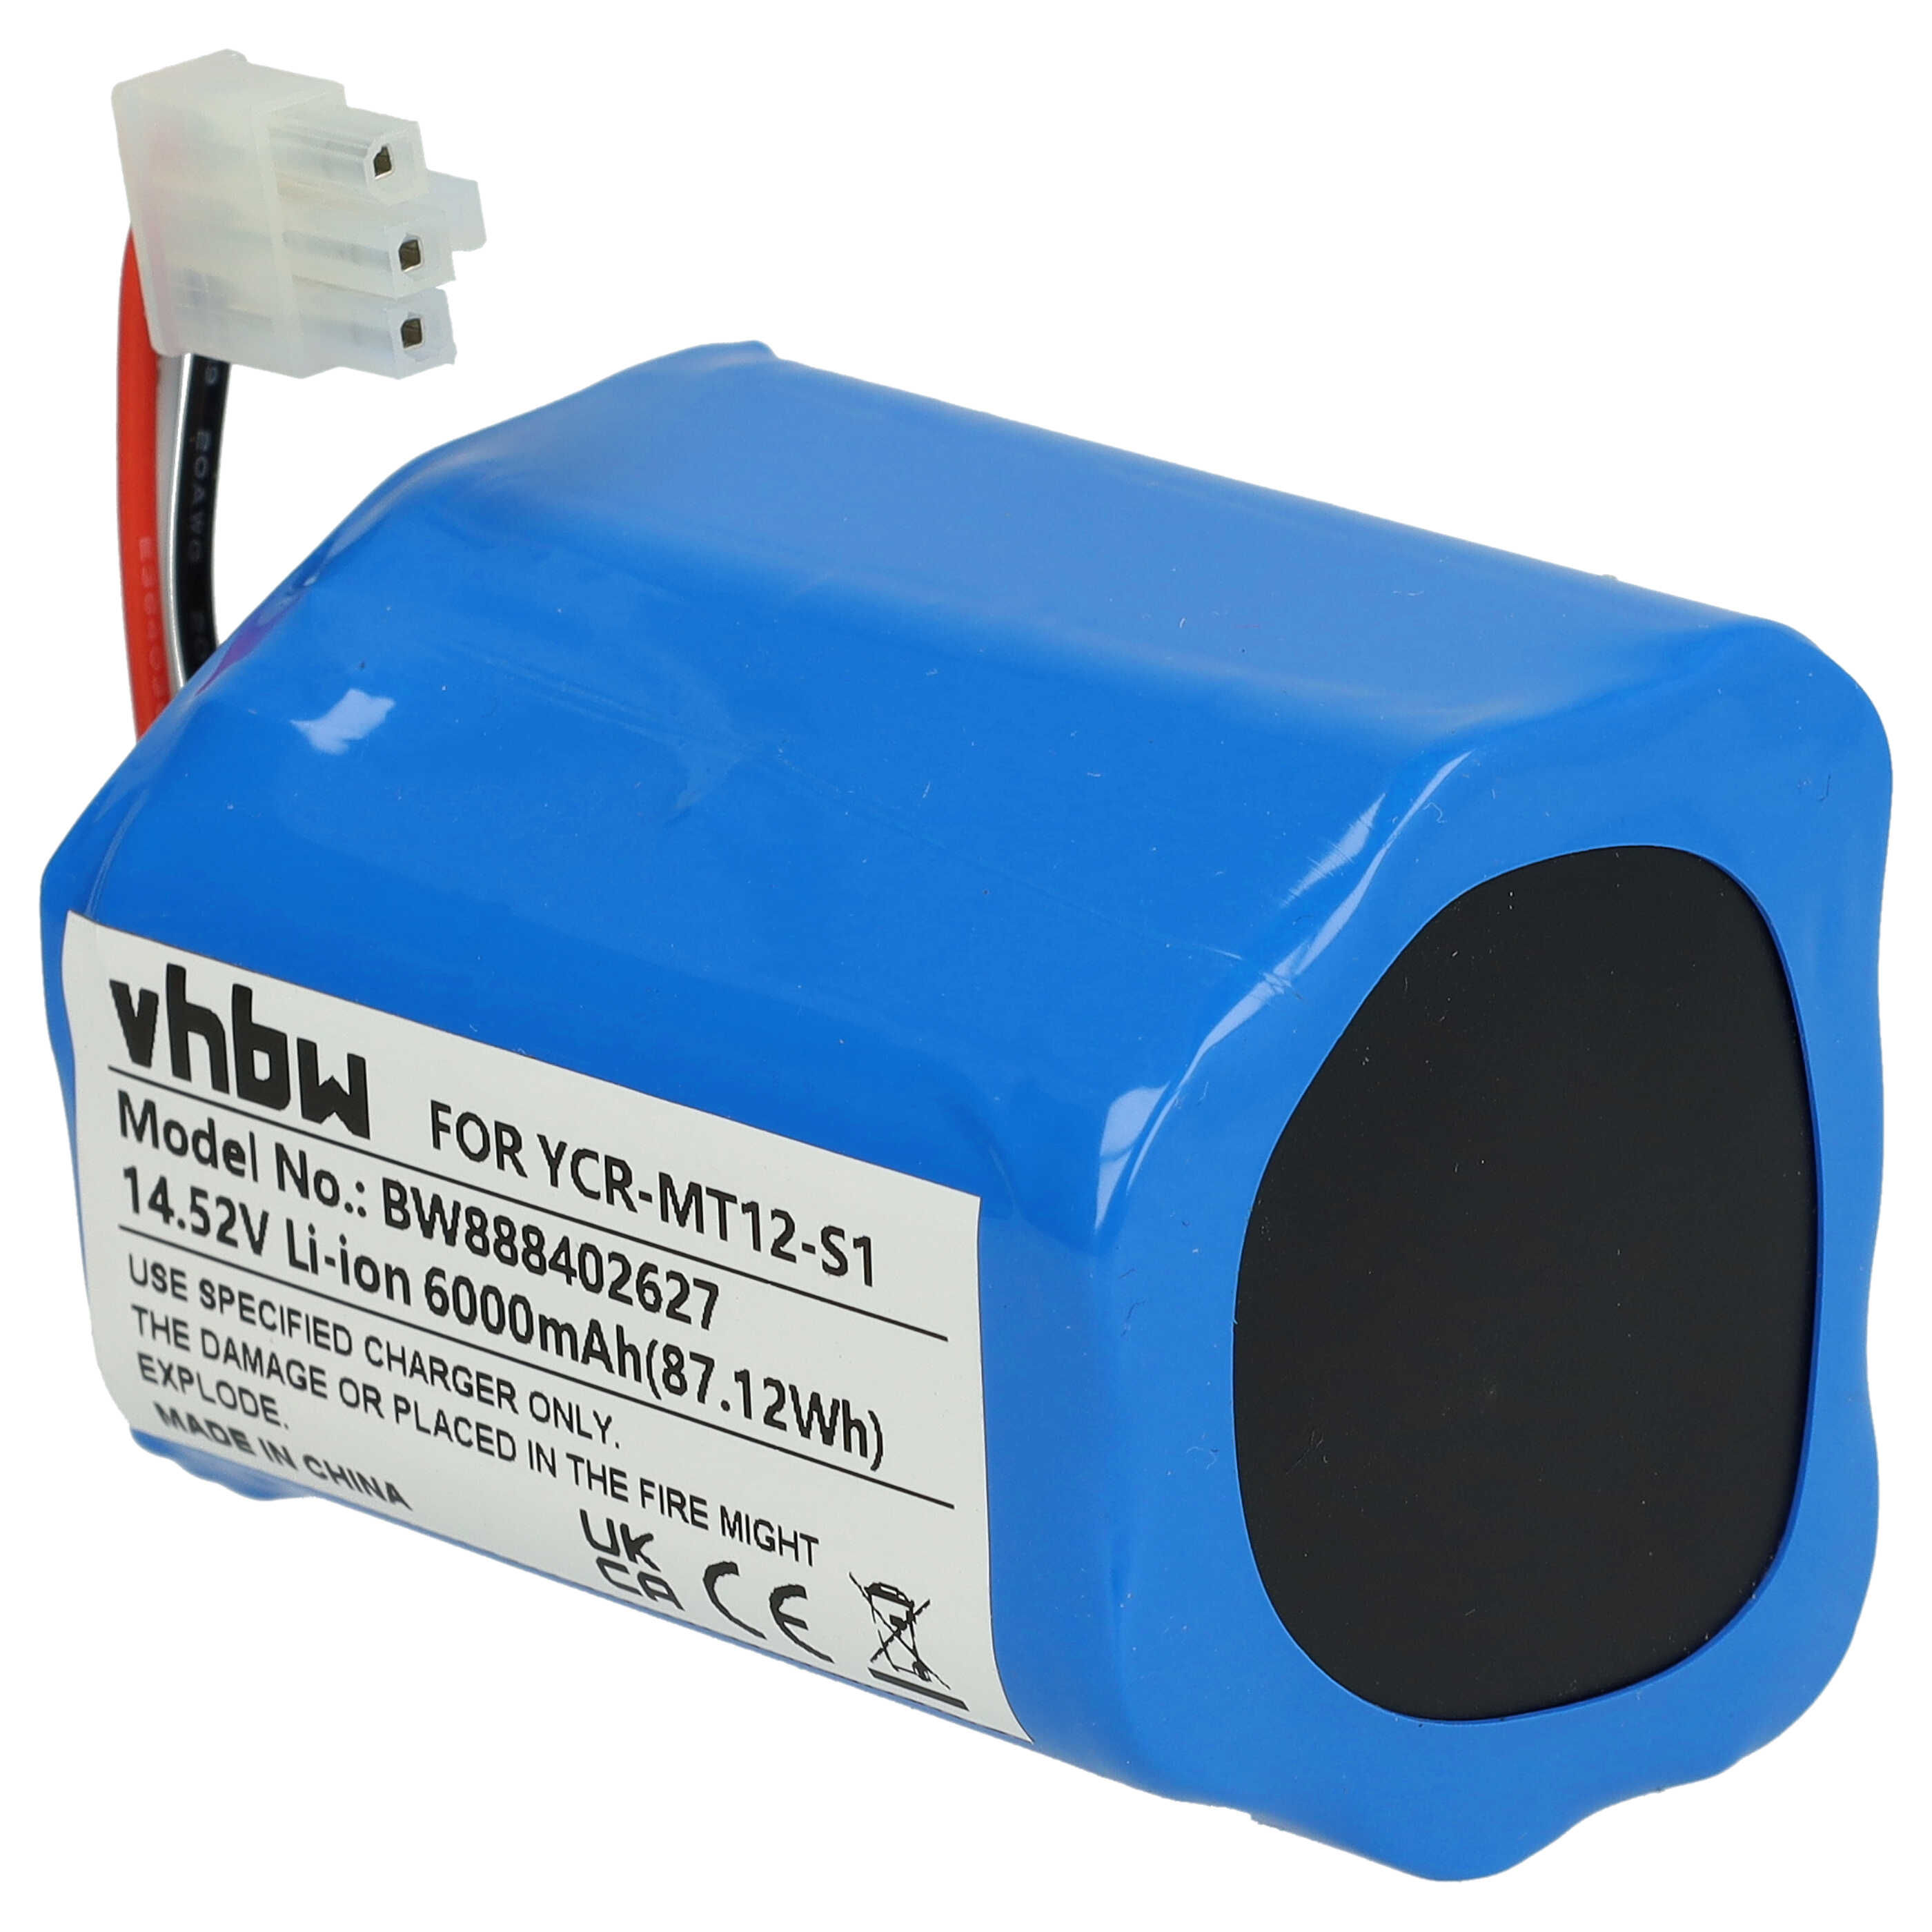 Battery Replacement for iClebo YCR-M07-20W, YCR-MT12-S1 for - 6000mAh, 14.52V, Li-Ion